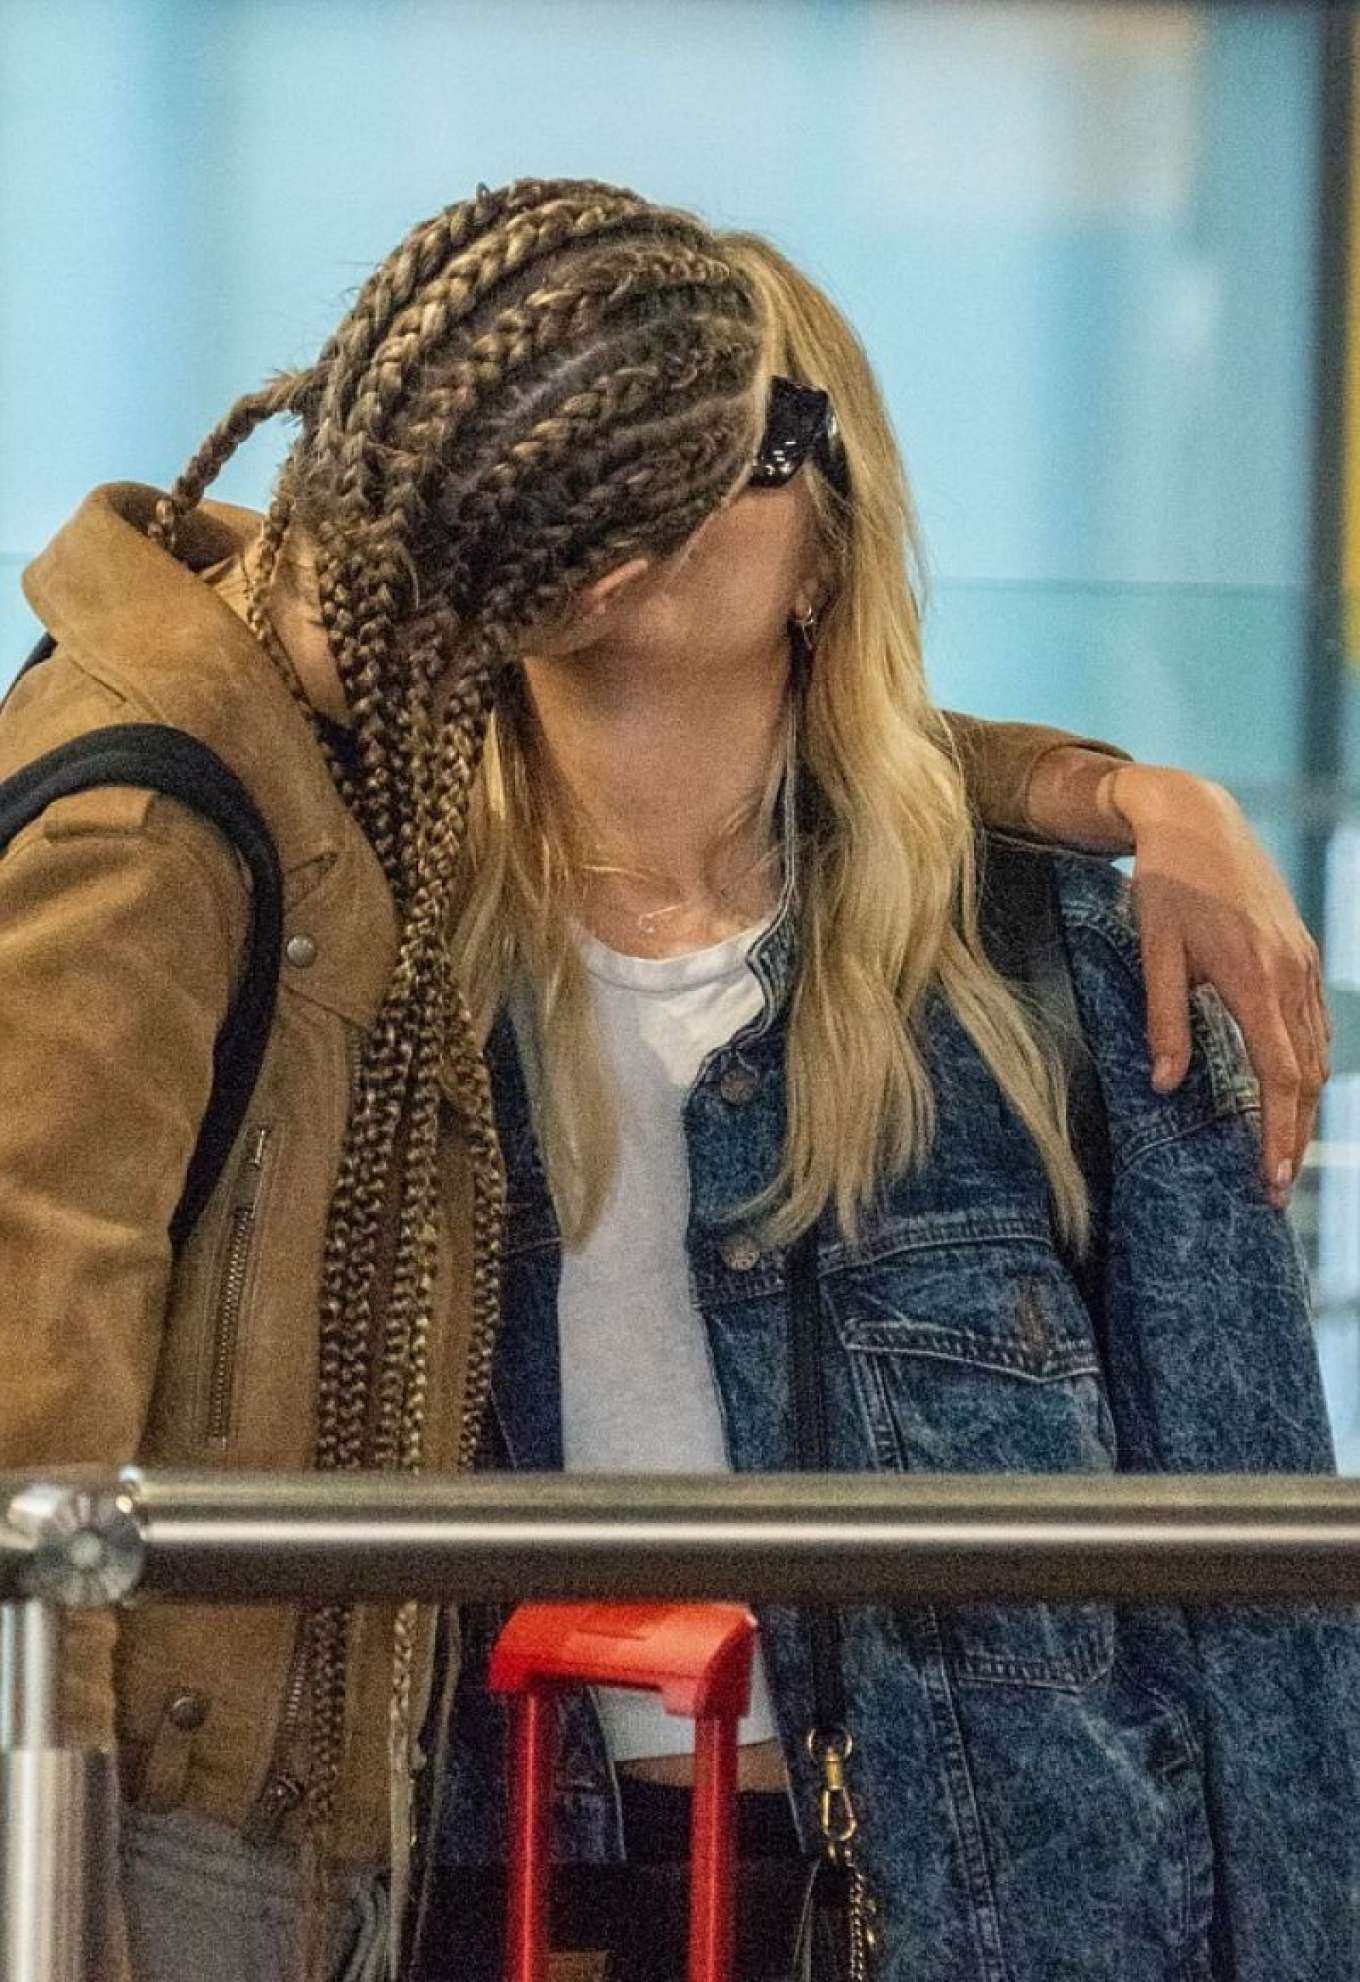 Ashley Benson and Cara Delevingne at Heathrow Airport in London